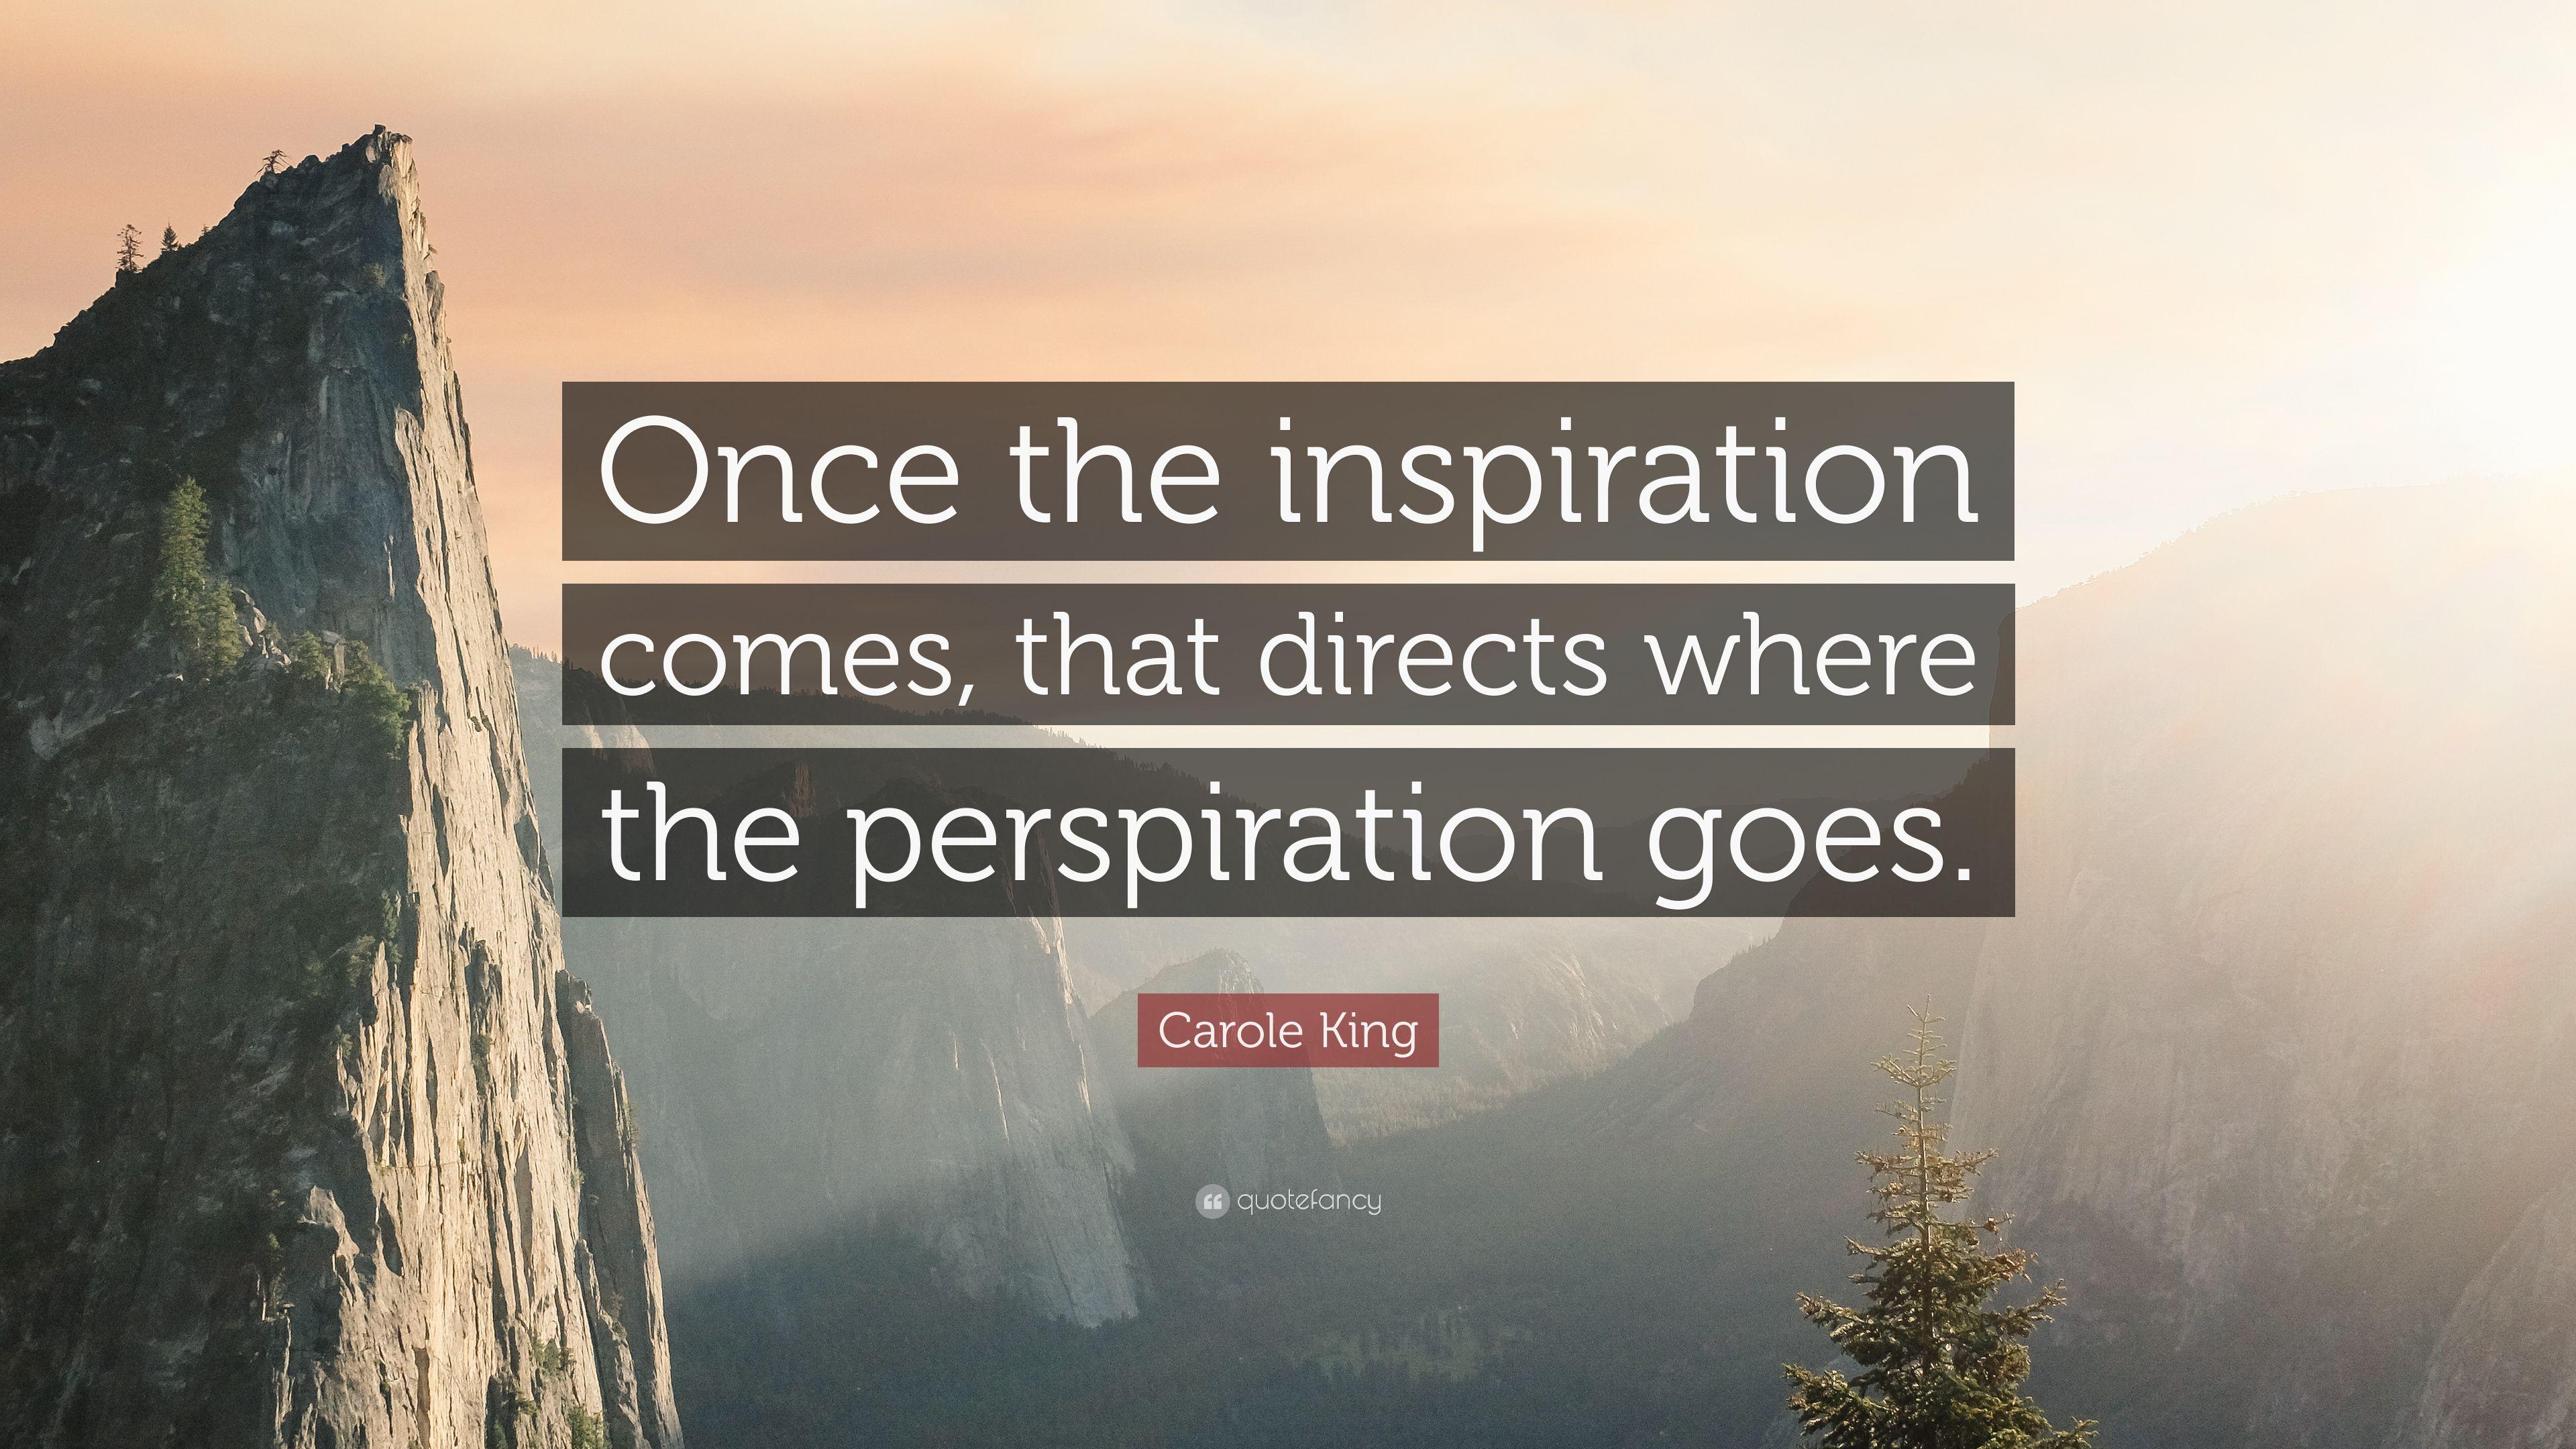 Carole King Quote: “Once the inspiration comes, that directs where